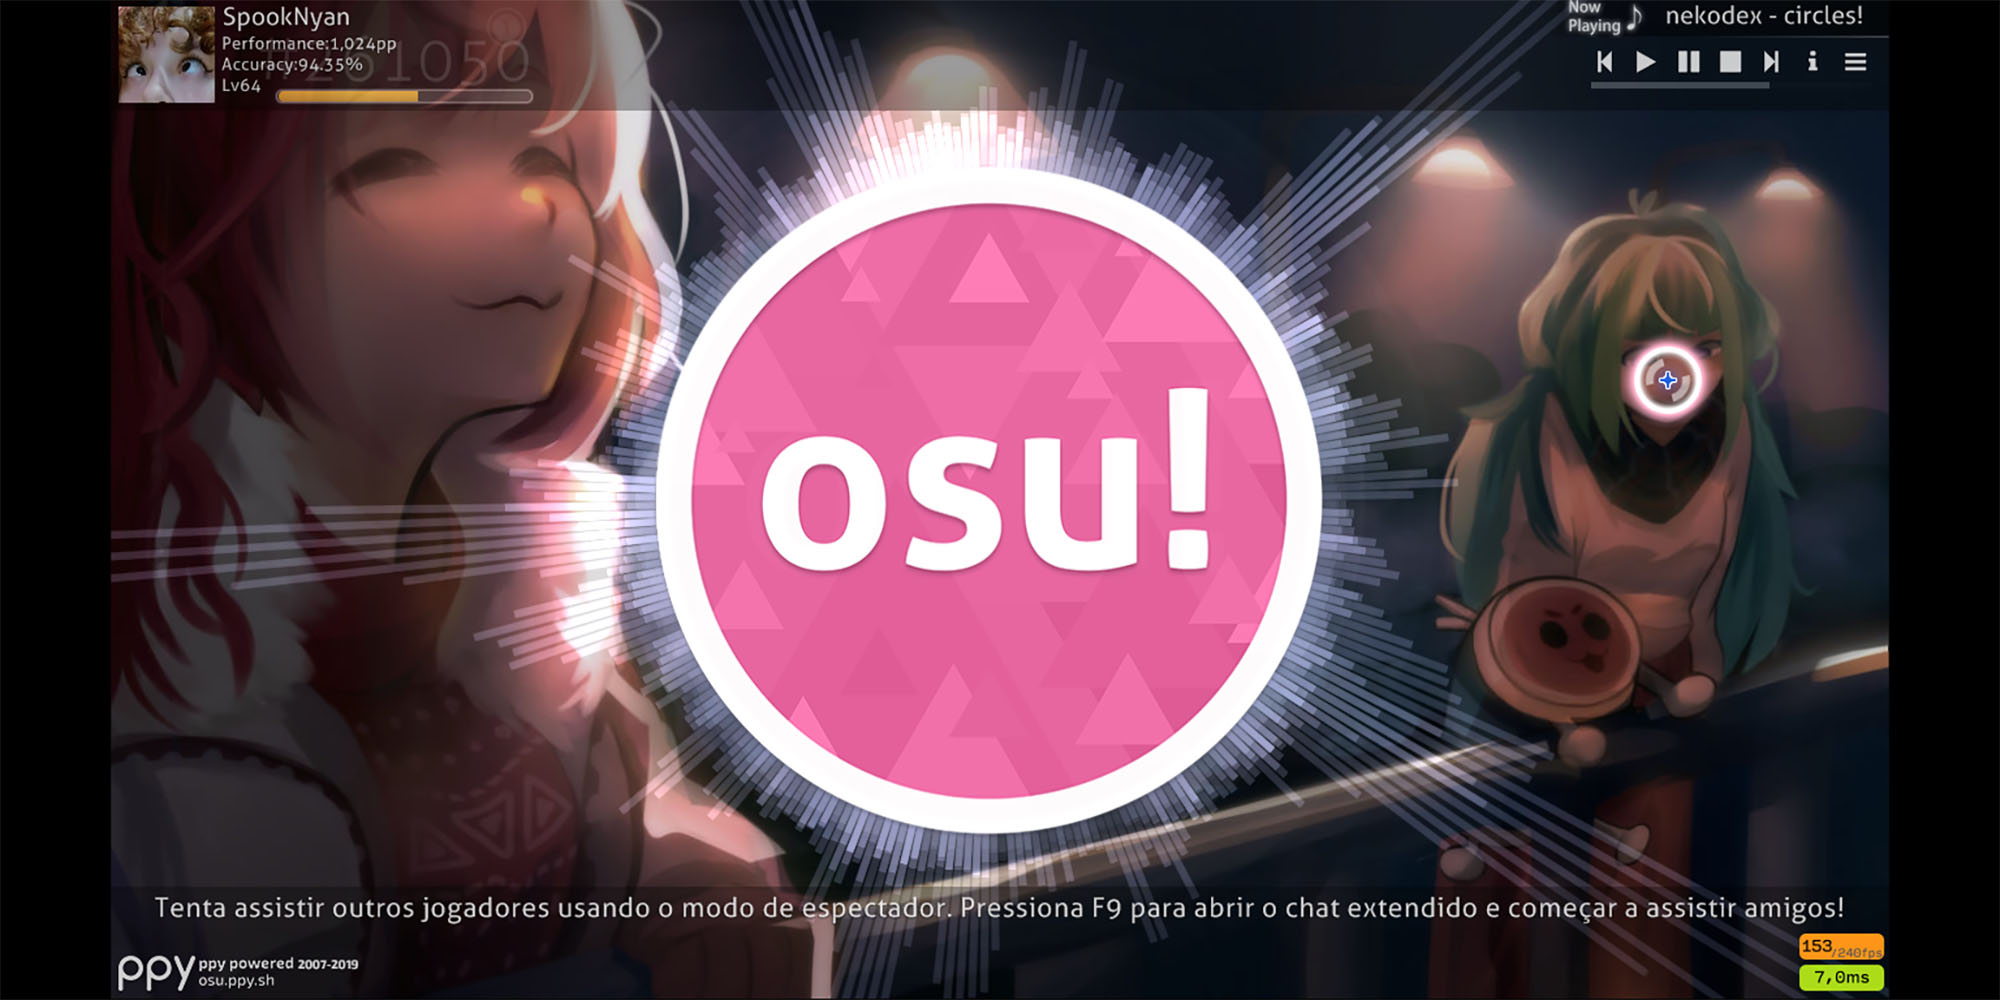 New kings of osu feature image